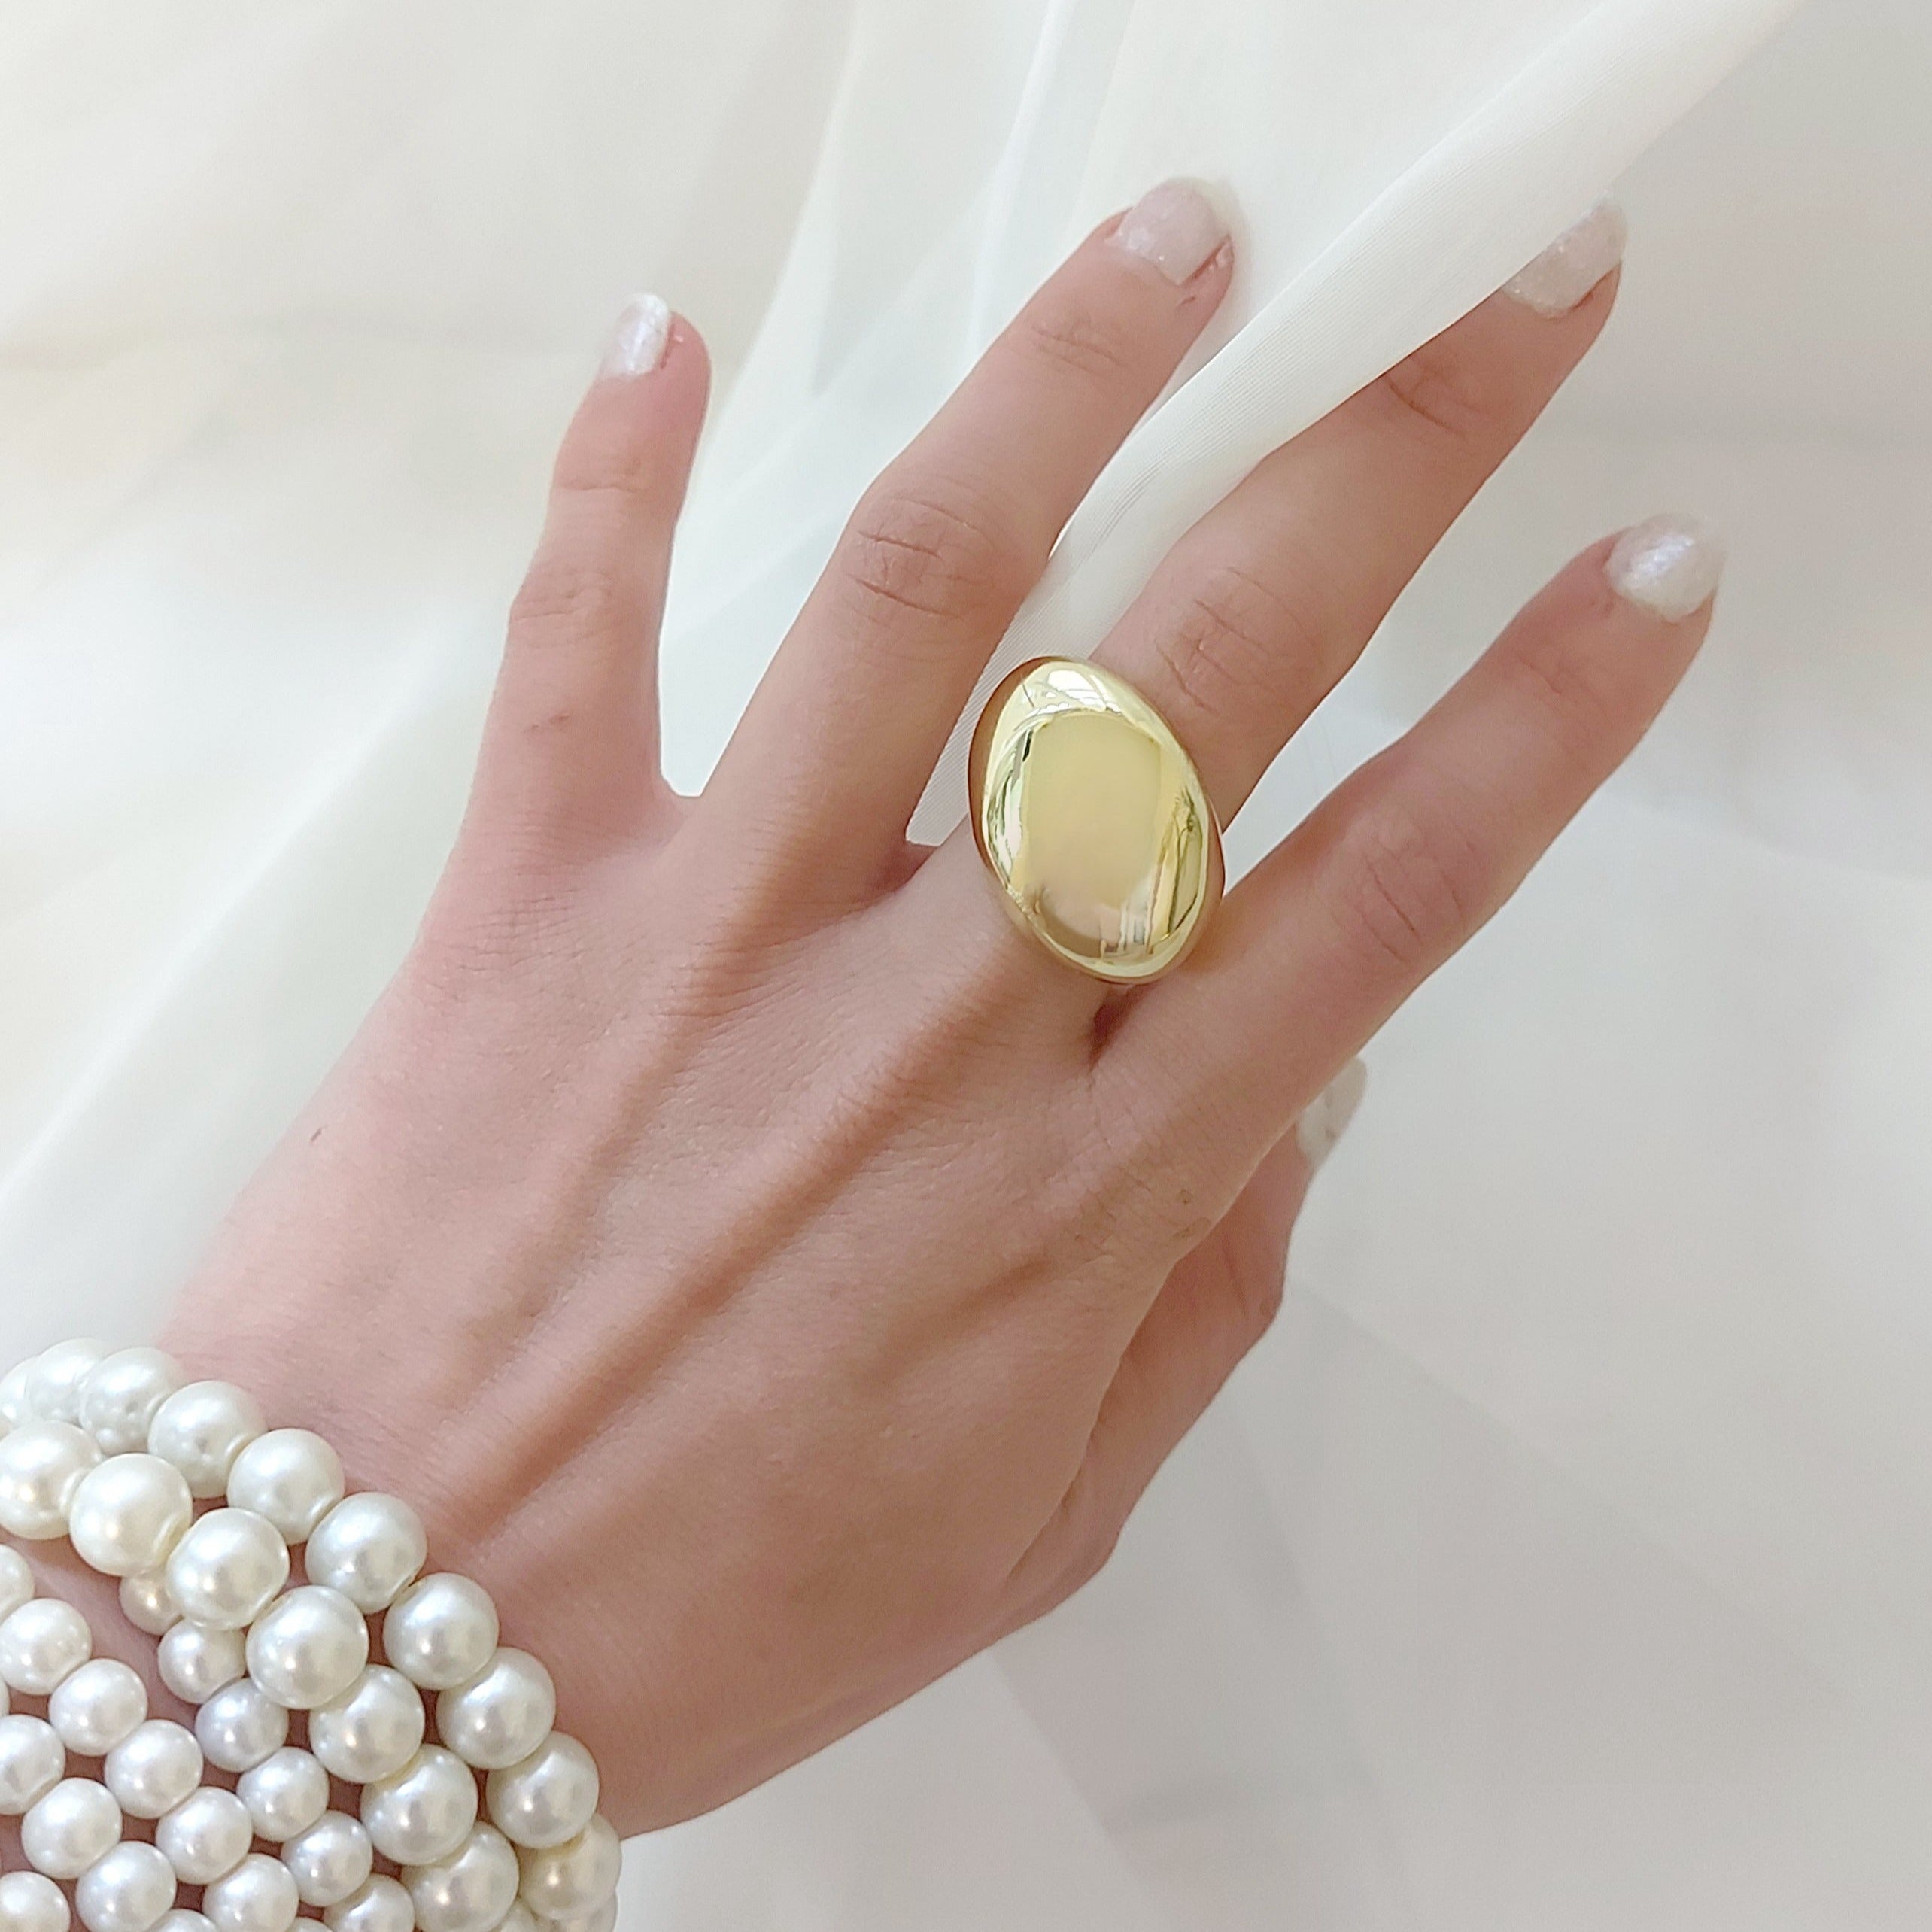 Dash oval ring